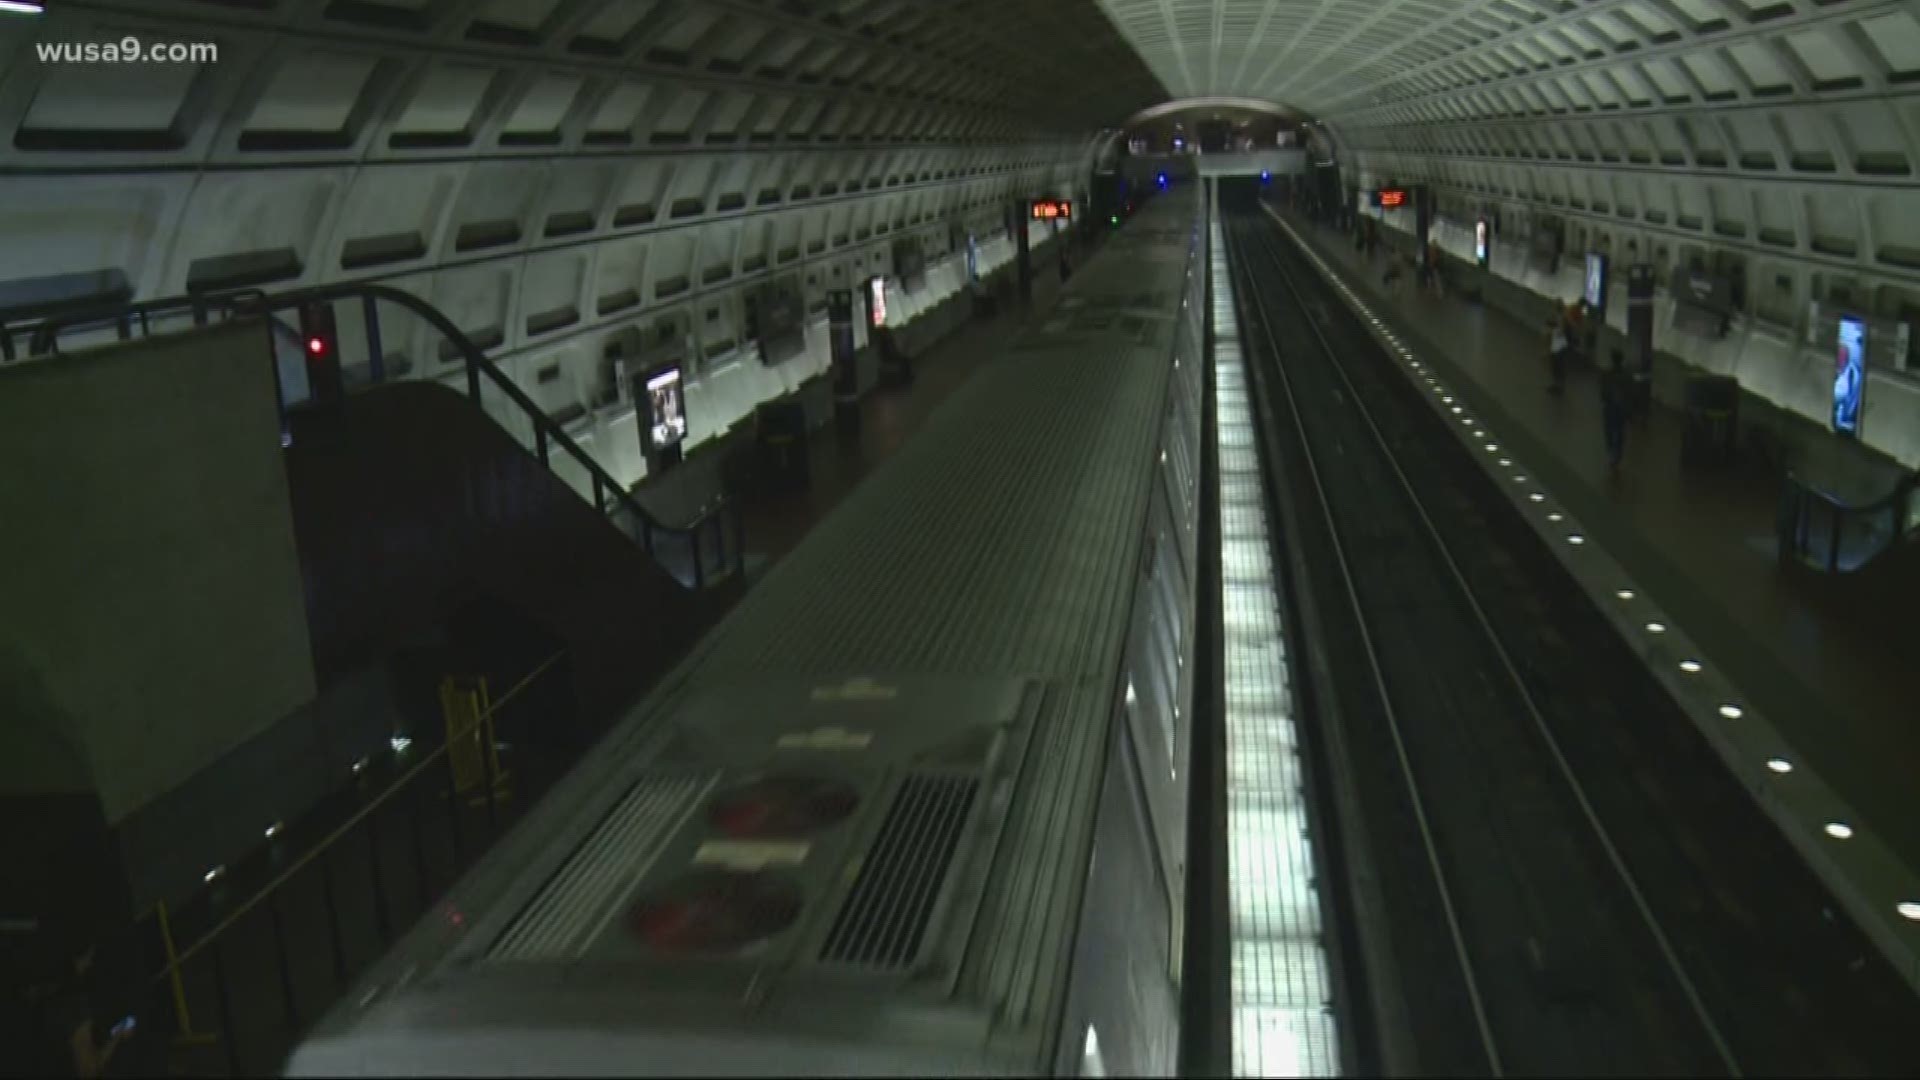 WMATA says the system is operating and providing chilled air to the stations.